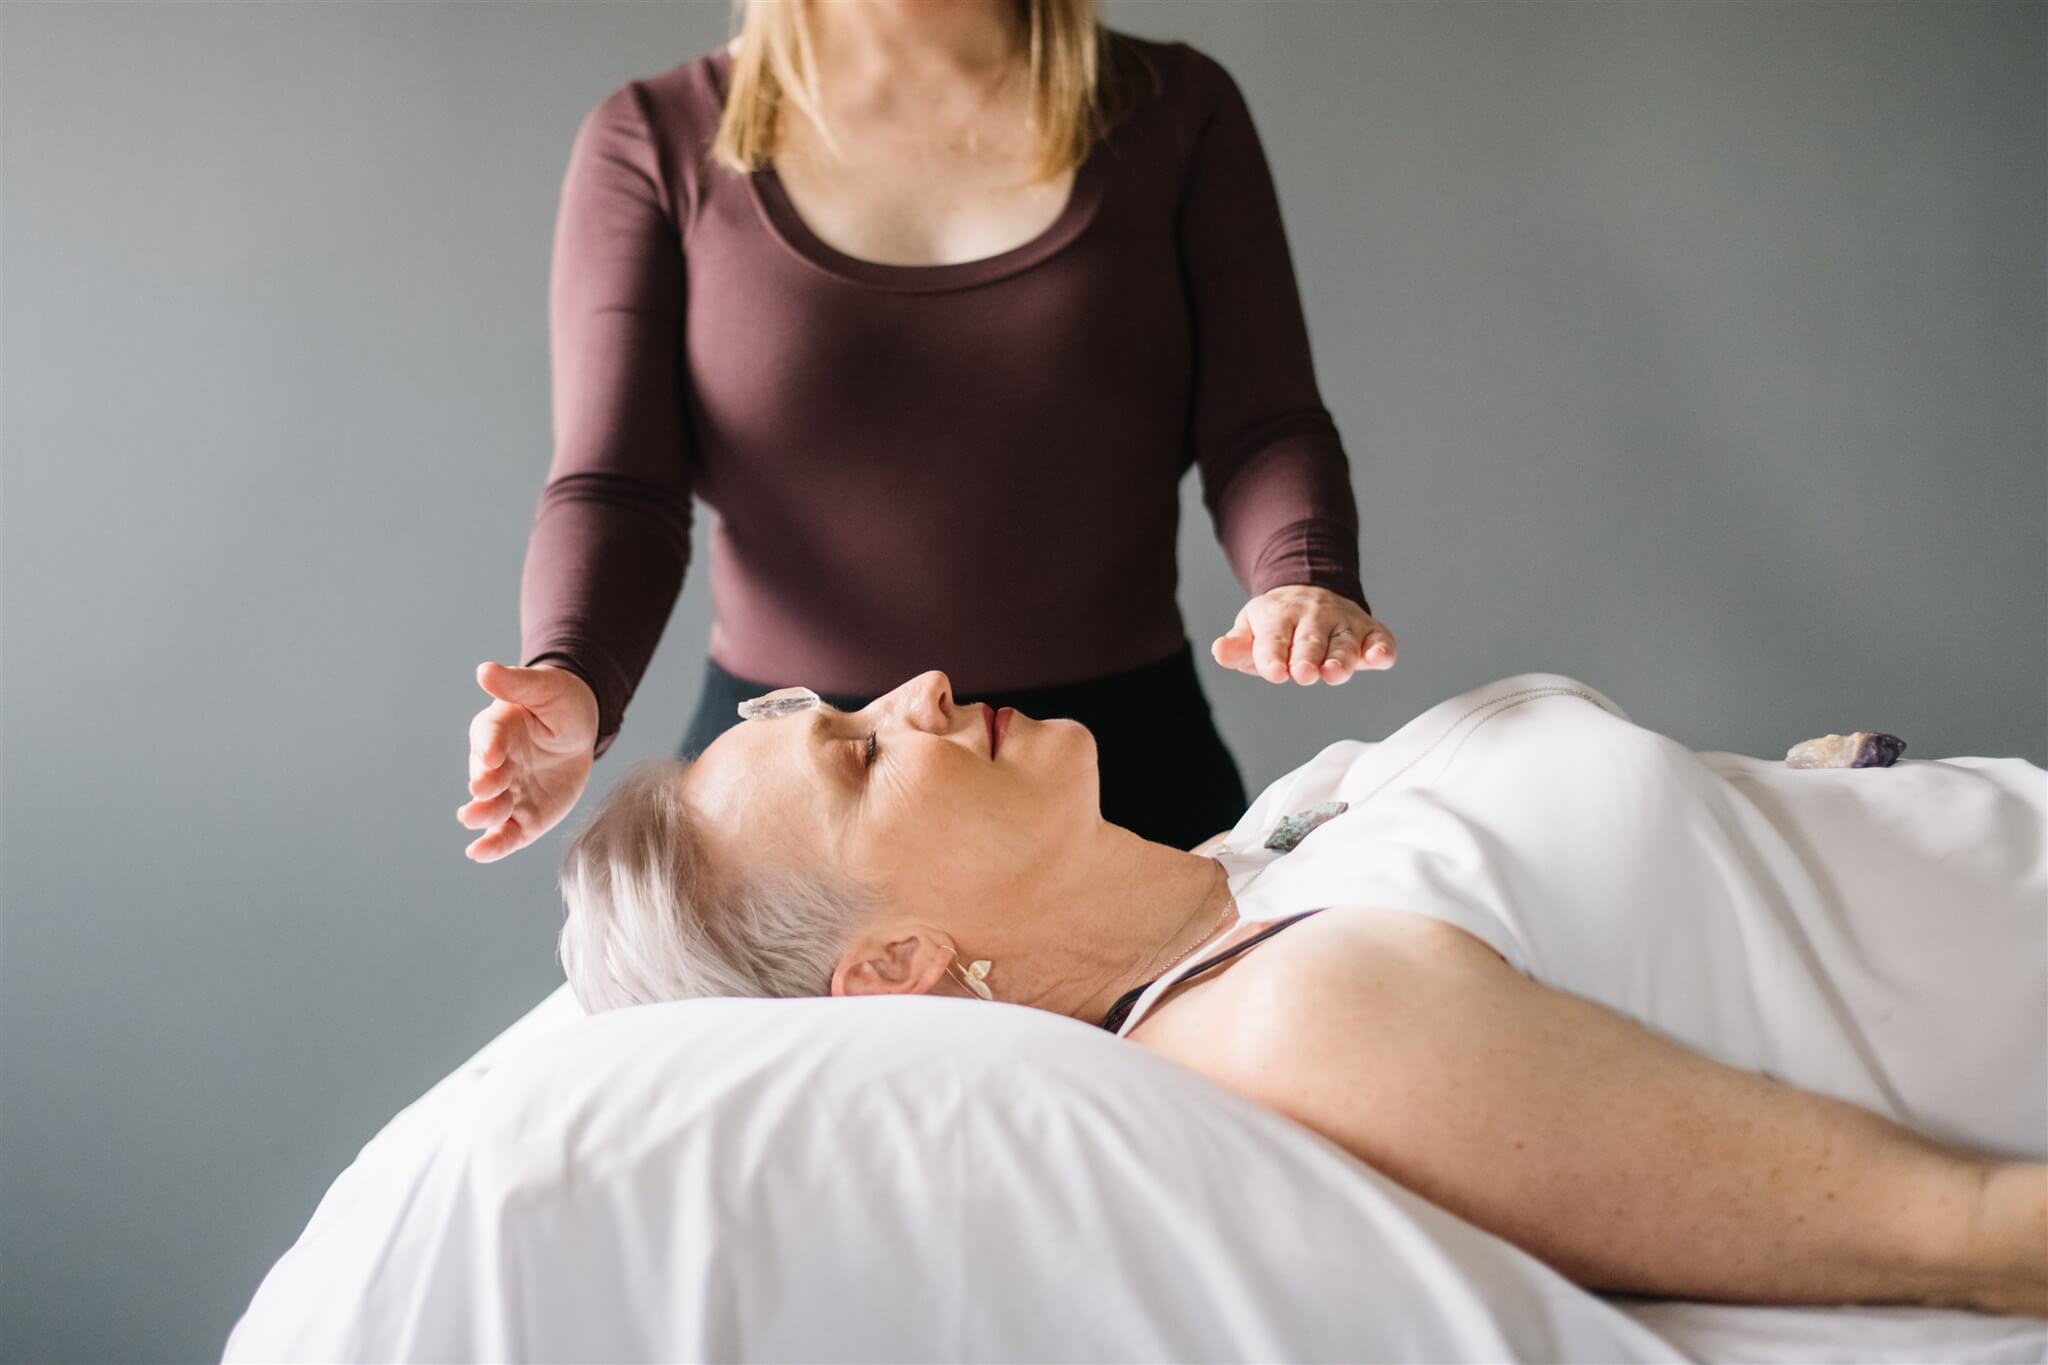 person performing reiki on a person laying on a bed